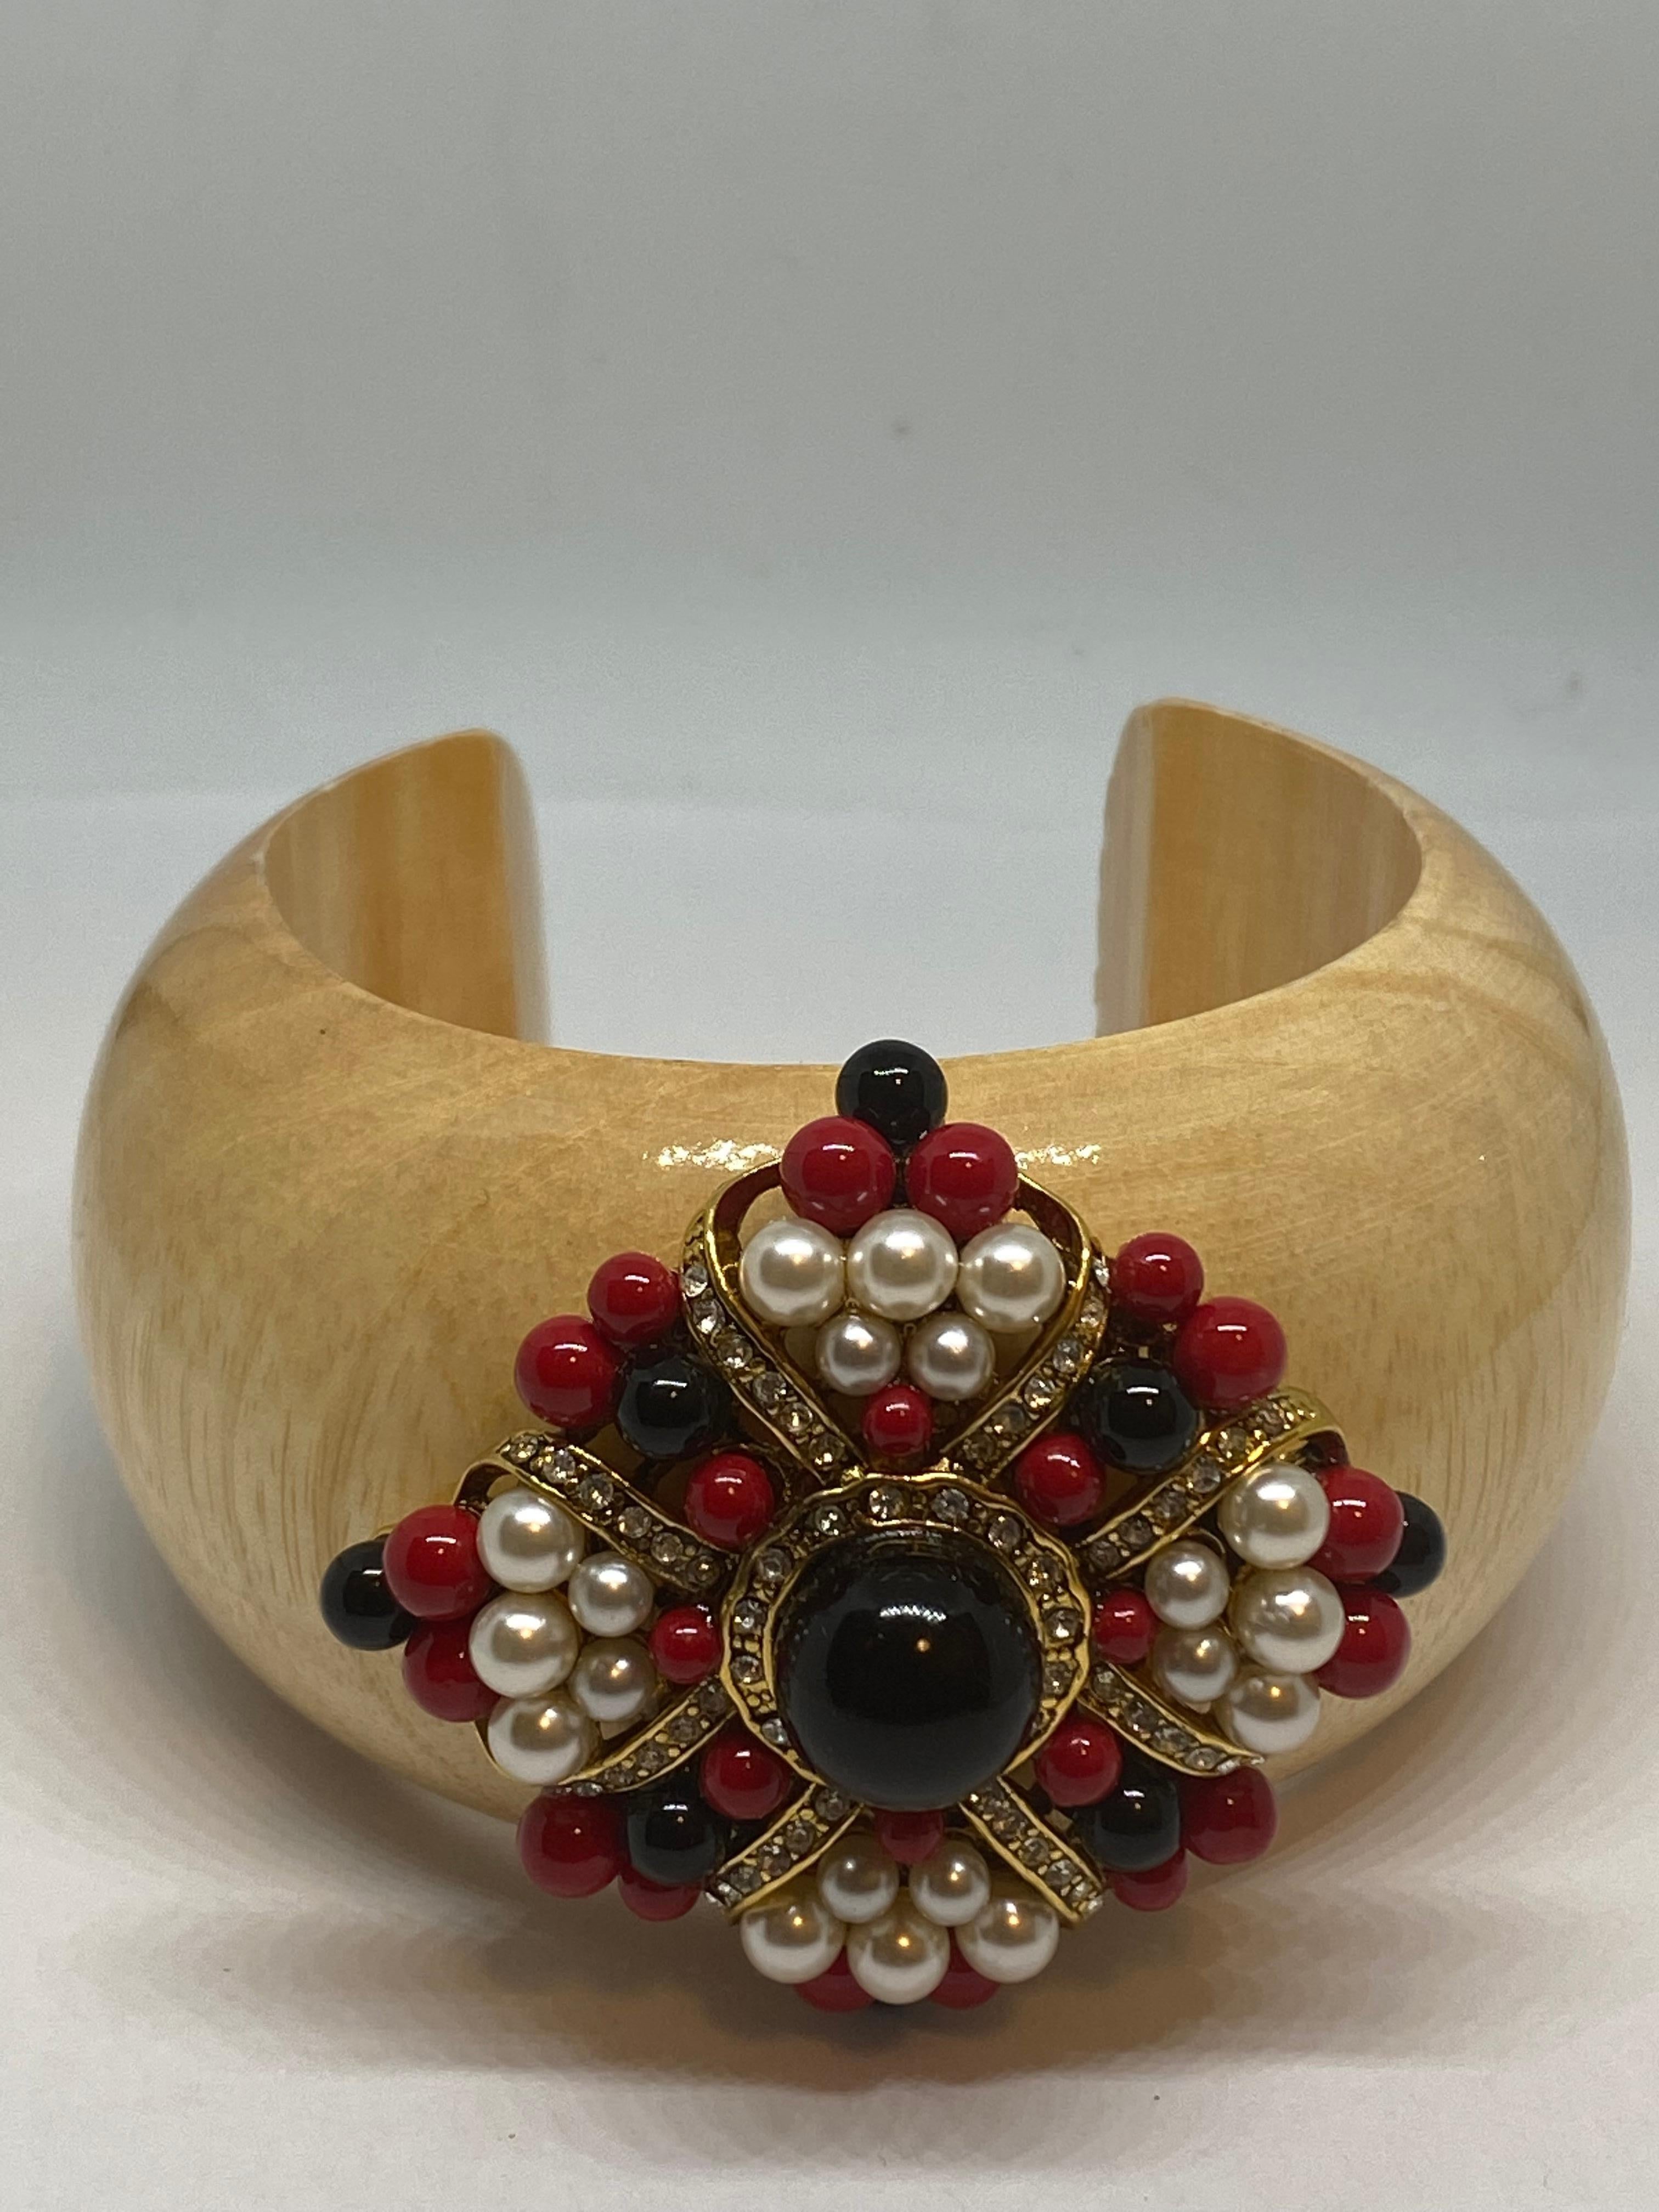 The Ravello Rose”
from the “IKON” private collection. 
Inspired by the Italian color motifs in the Amalfi Coast. 
This Mediterranean resin Flower Cuff uses the red coral color that is a tradition that dates back to the days of ancient Rome, with